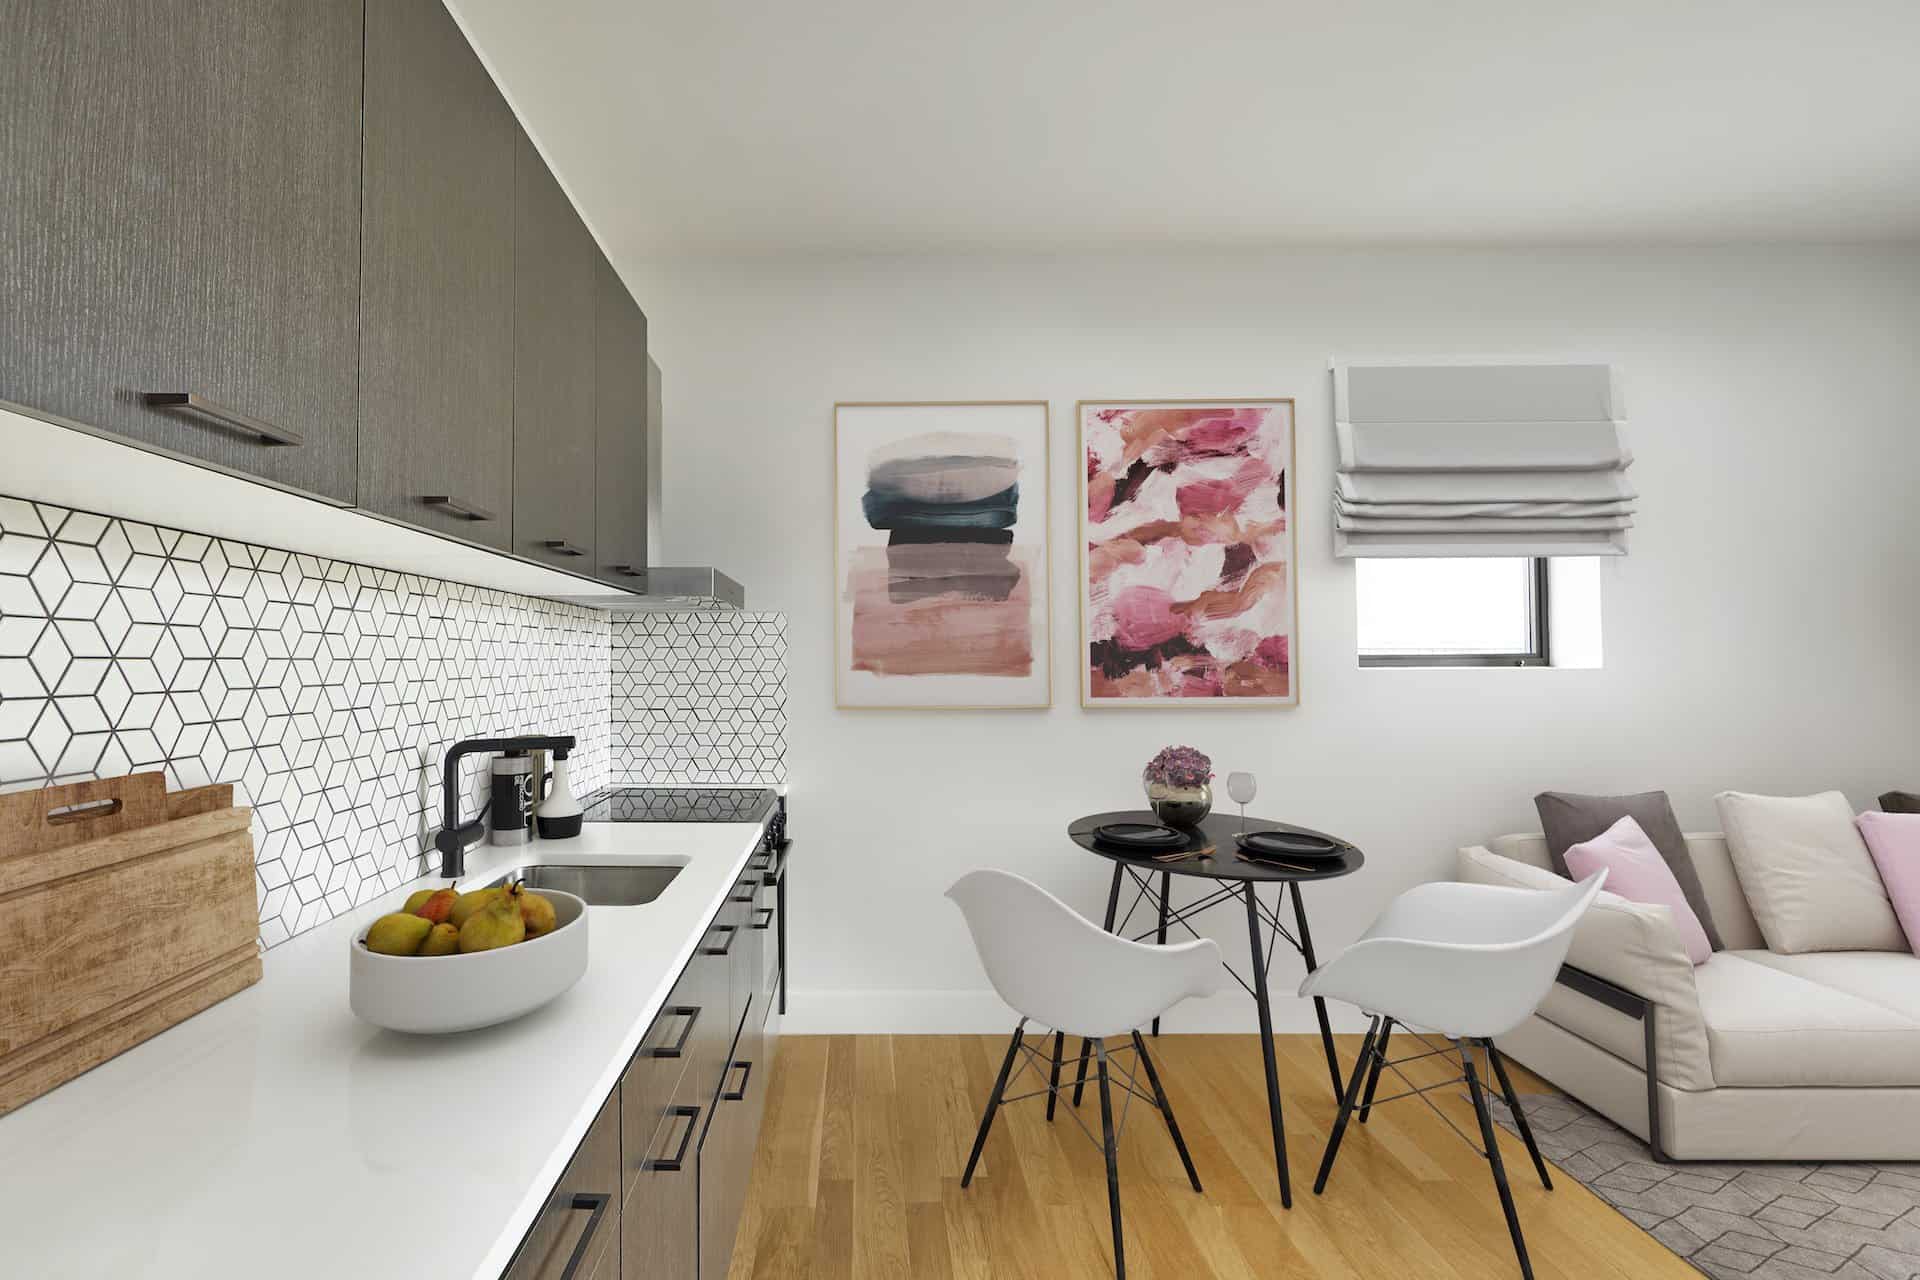 Kitchen in a studio apartment at 101 East 10th Street in New York. White kitchen counter, wood cabinets, oven & dining table.